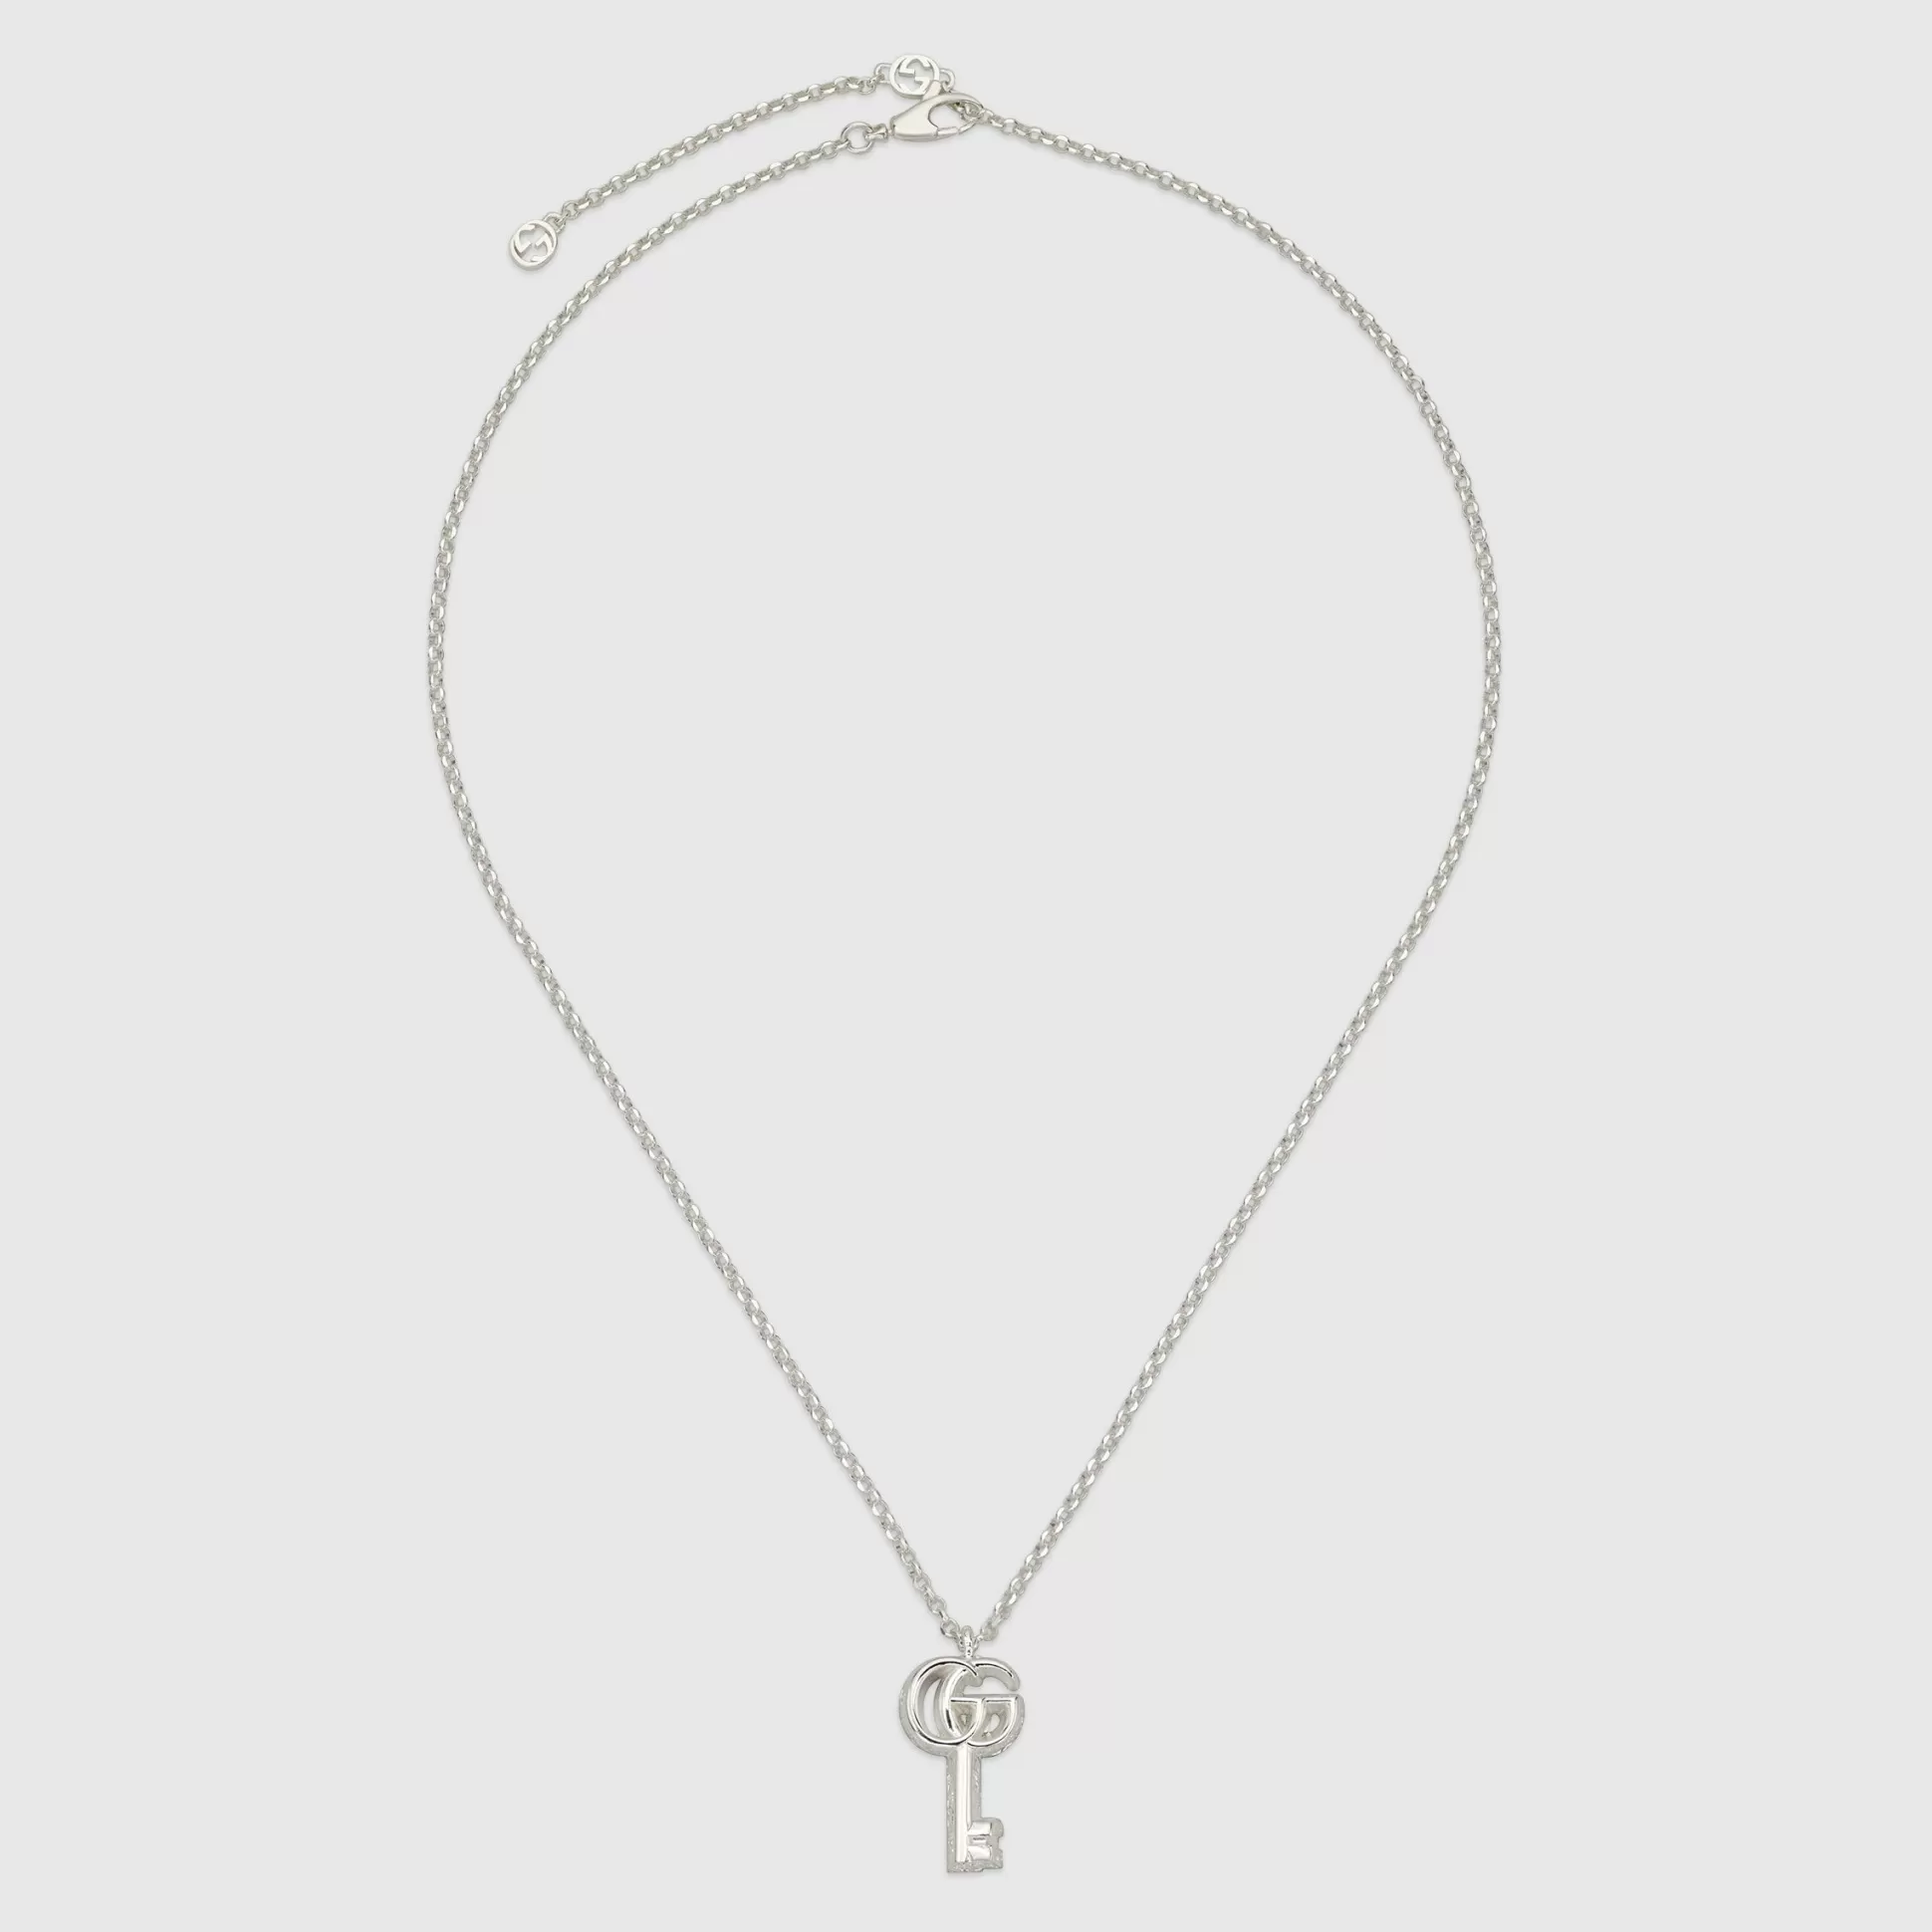 GUCCI Gg Marmont Key Charm Necklace- Necklaces